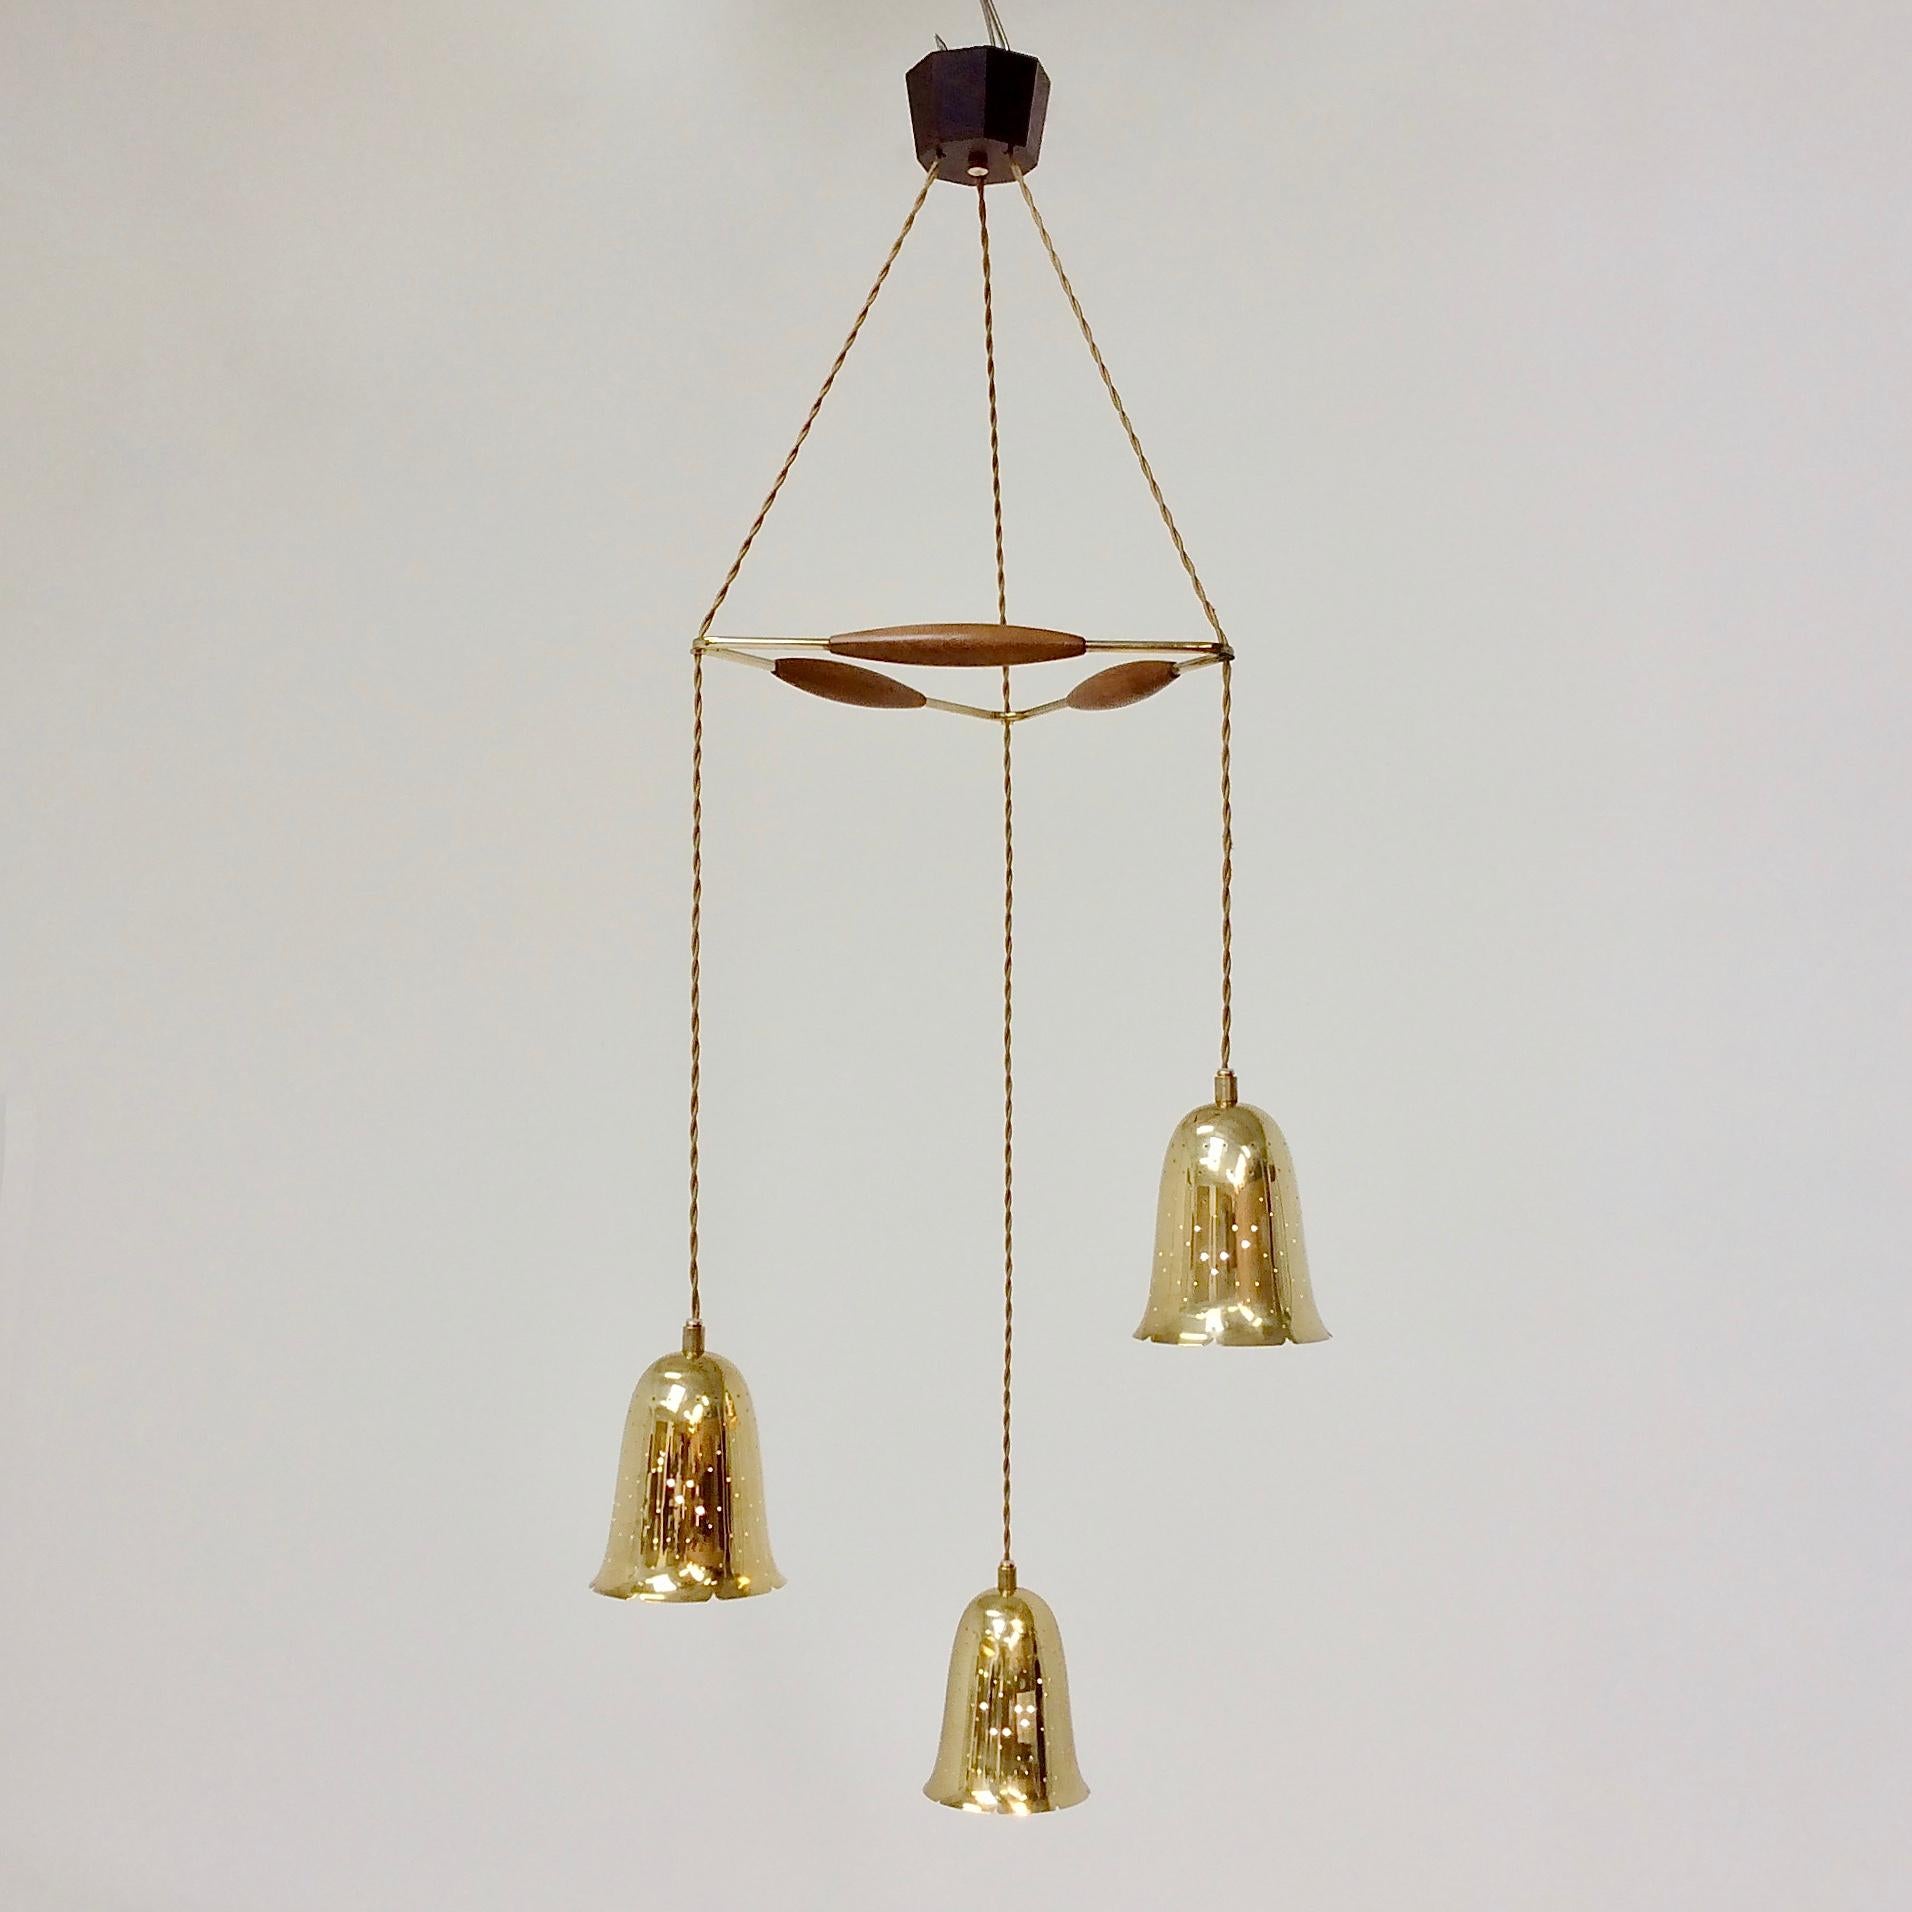 Elegant Hans-Agne Jakobsson pendant lamp, circa 1950, Sweden.
3 perforated brass shades, electric textile cords joined by a brass and solid wood triangle. Ceiling solid dark wood mount with brass detail.
3 little E 27 40W bulbs. Rewired.
Dimensions: